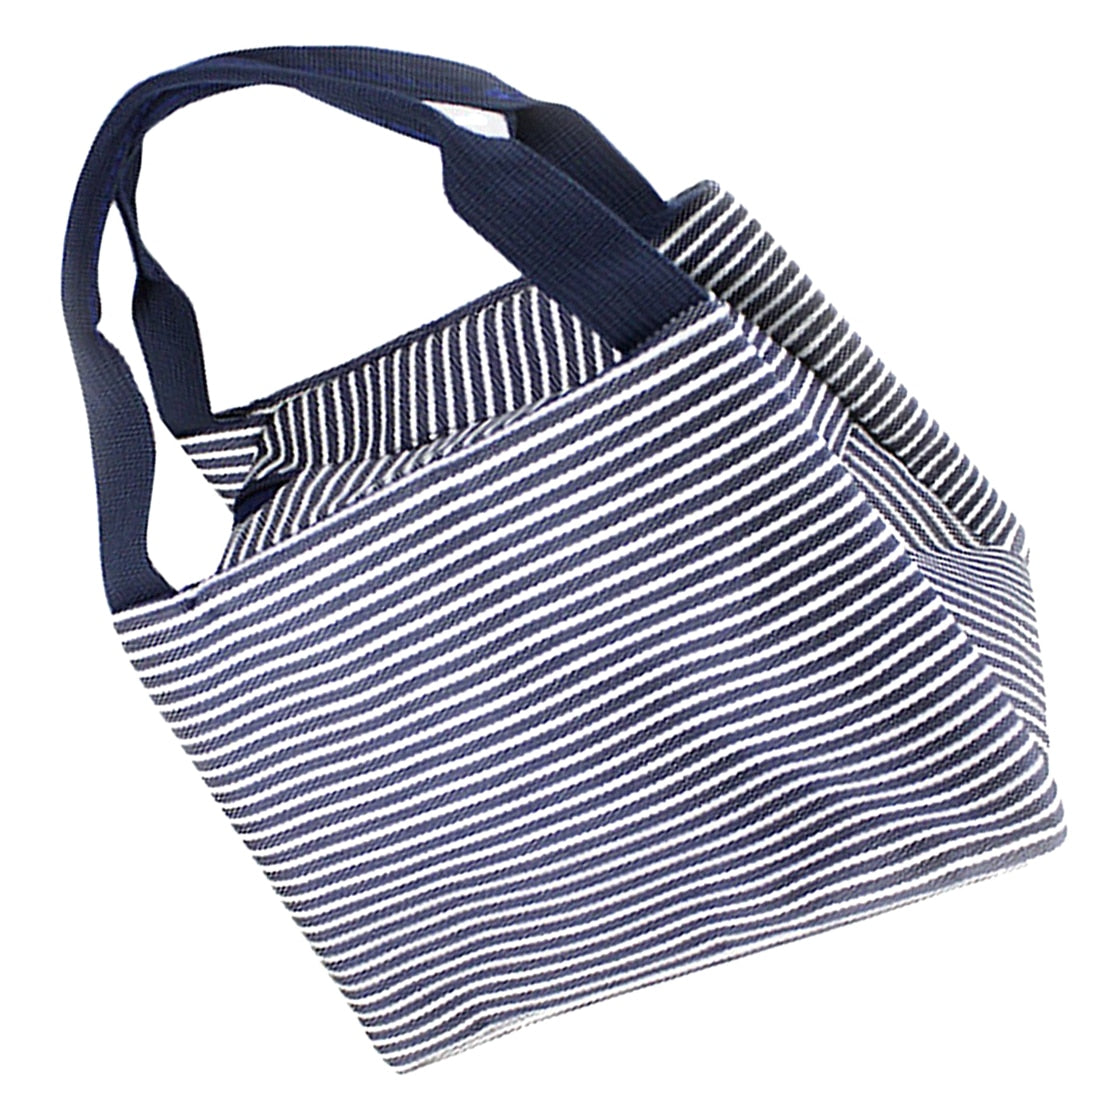 Hot Stripe Lunch Box Carry Bag for Travel Picnic Blue - ebowsos